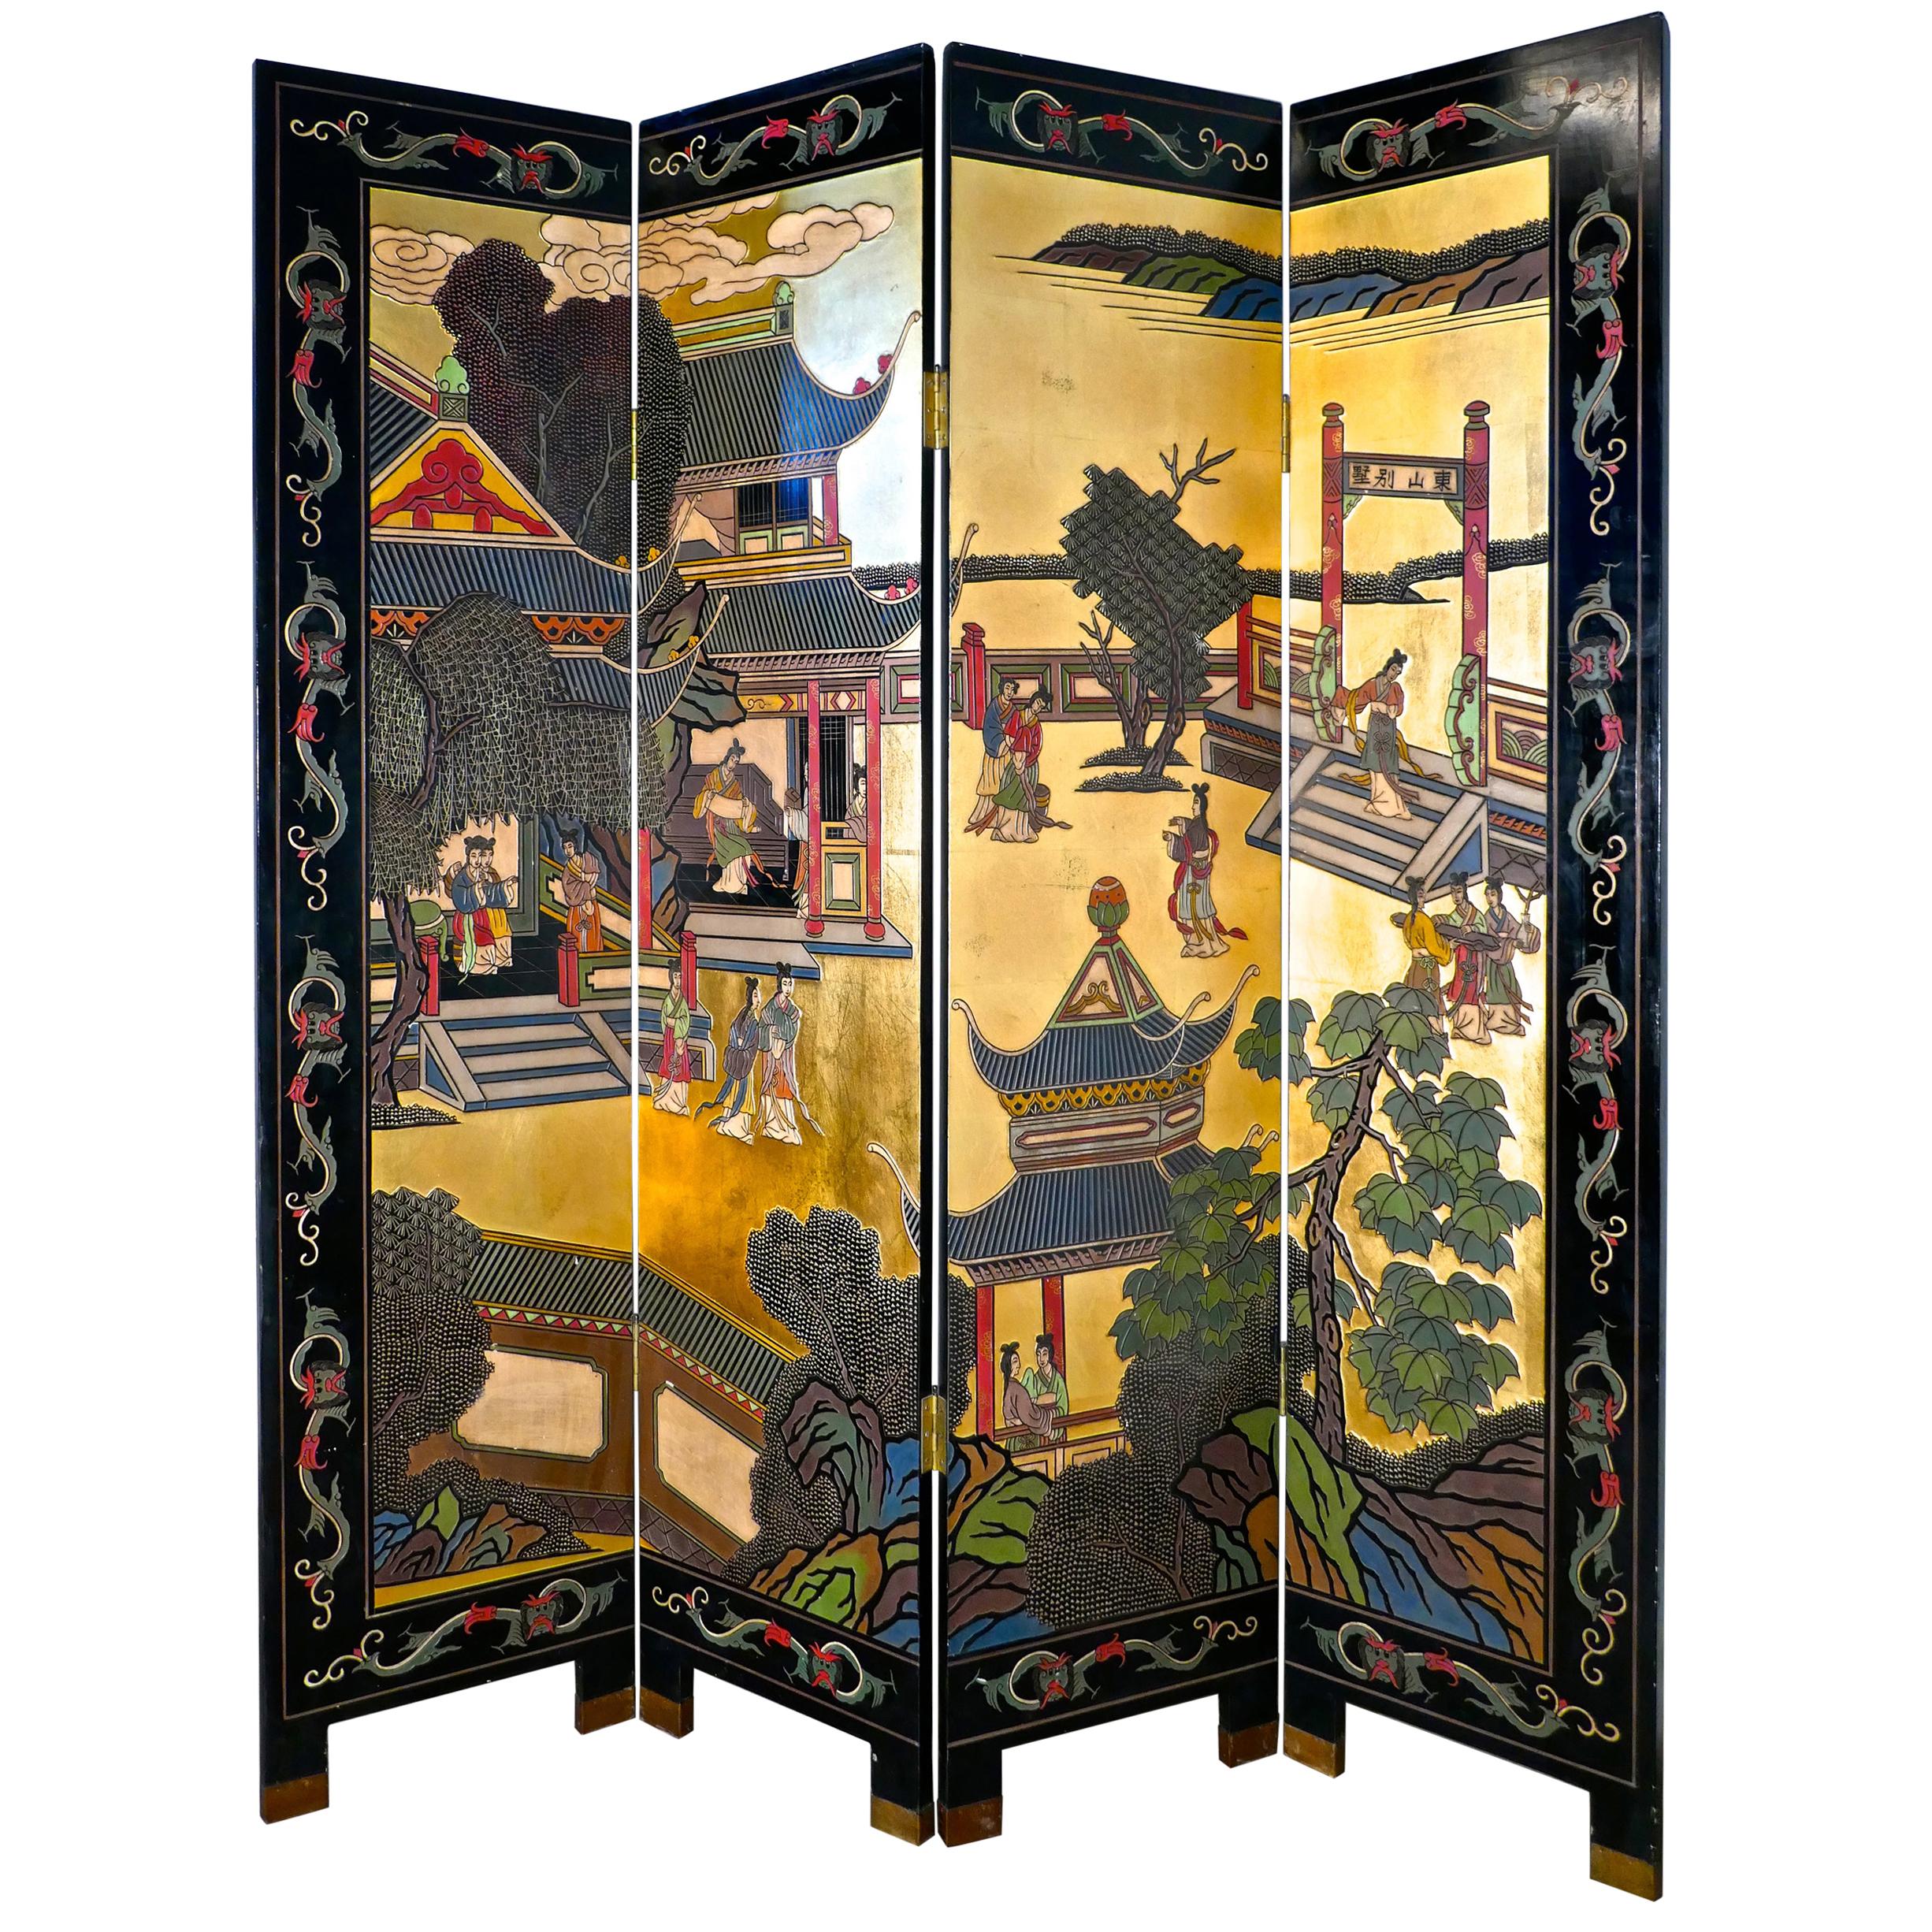 Large Heavy Decorated Japanese Lacquer Room Divider Screen